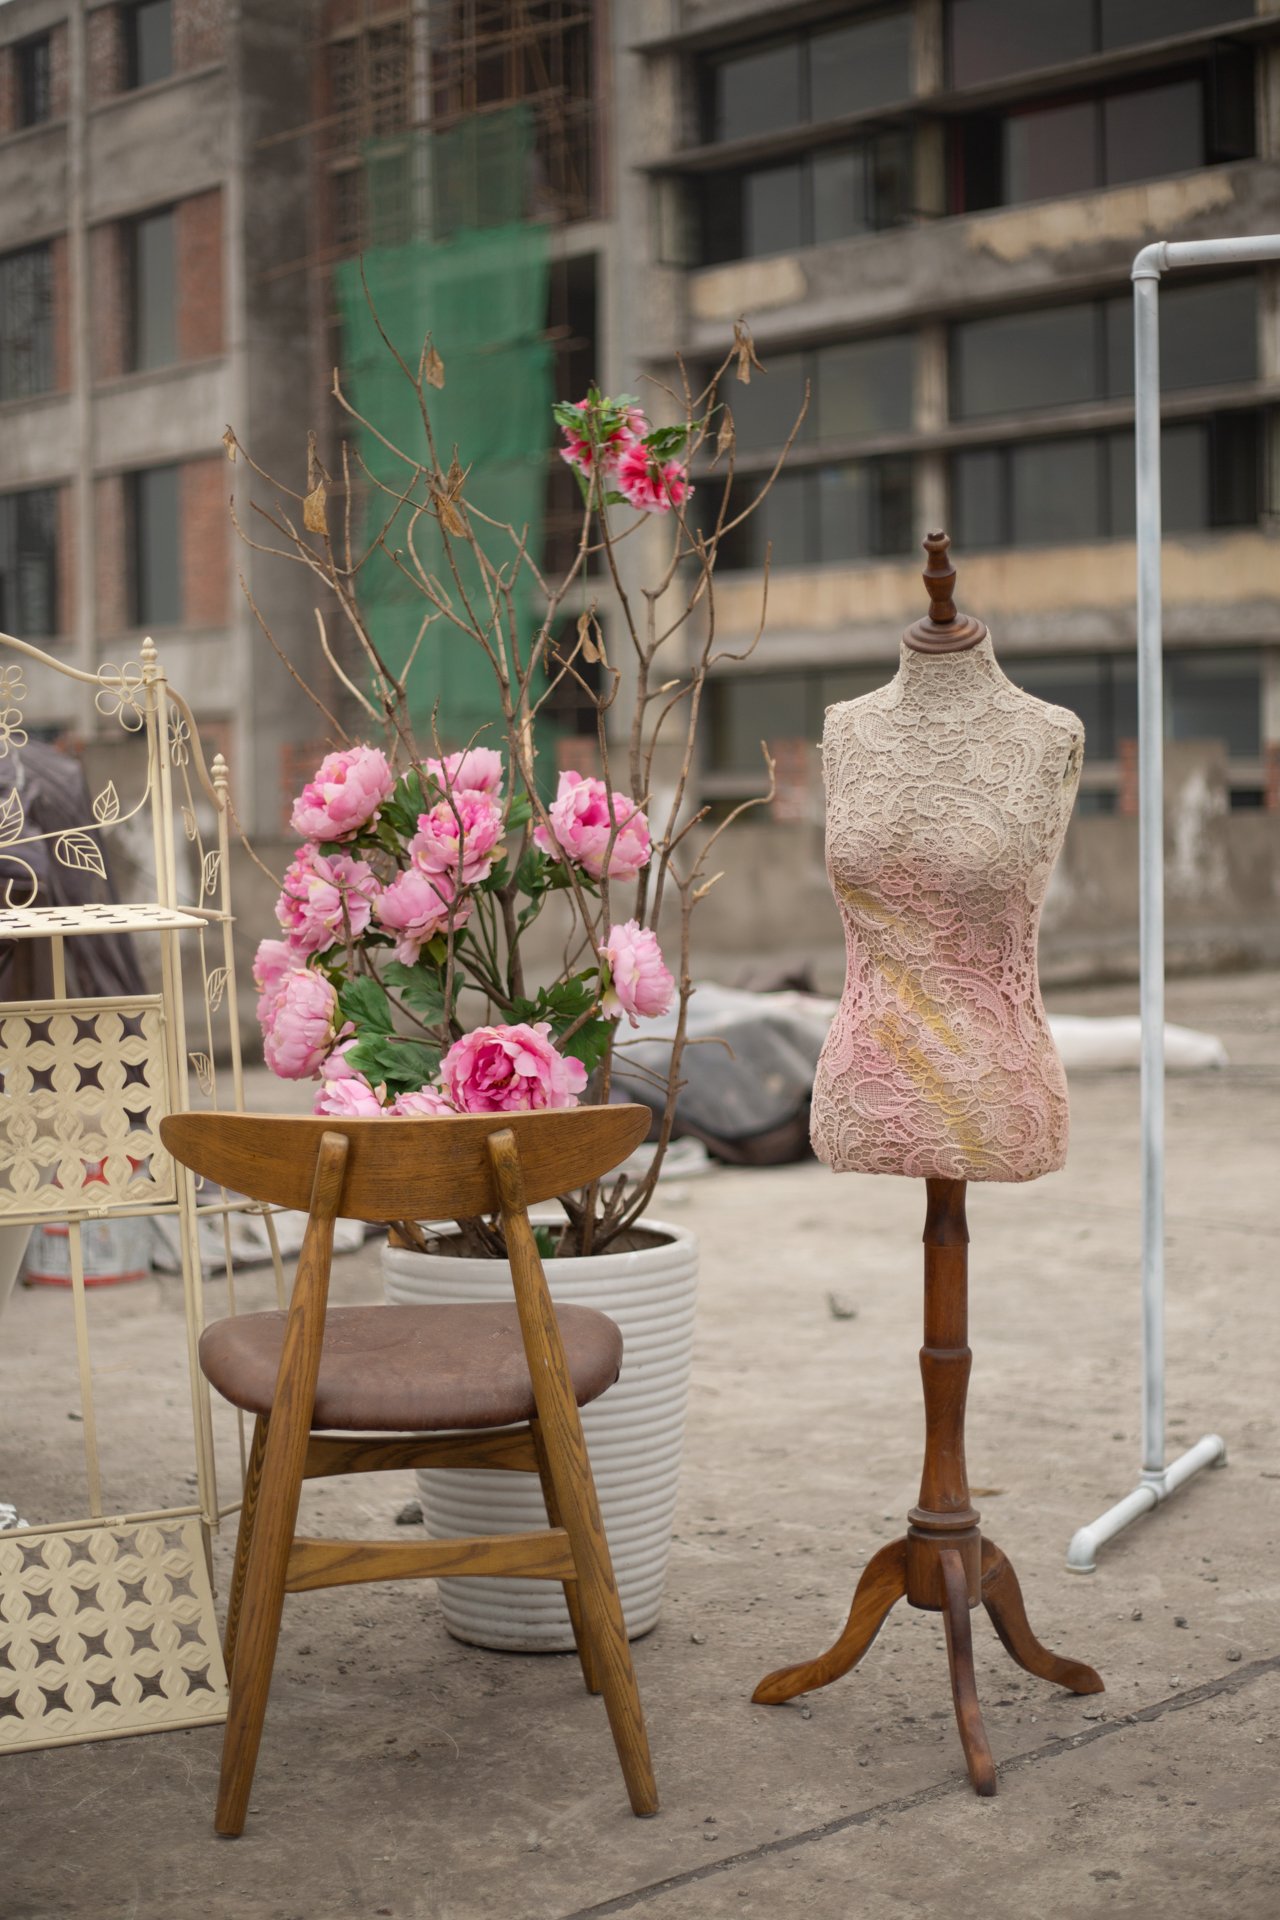  Chongqing is a city in constant flux, and personal items are scattered around construction sites with little certainty of whether they are belongings of past or future occupants. December 2017 